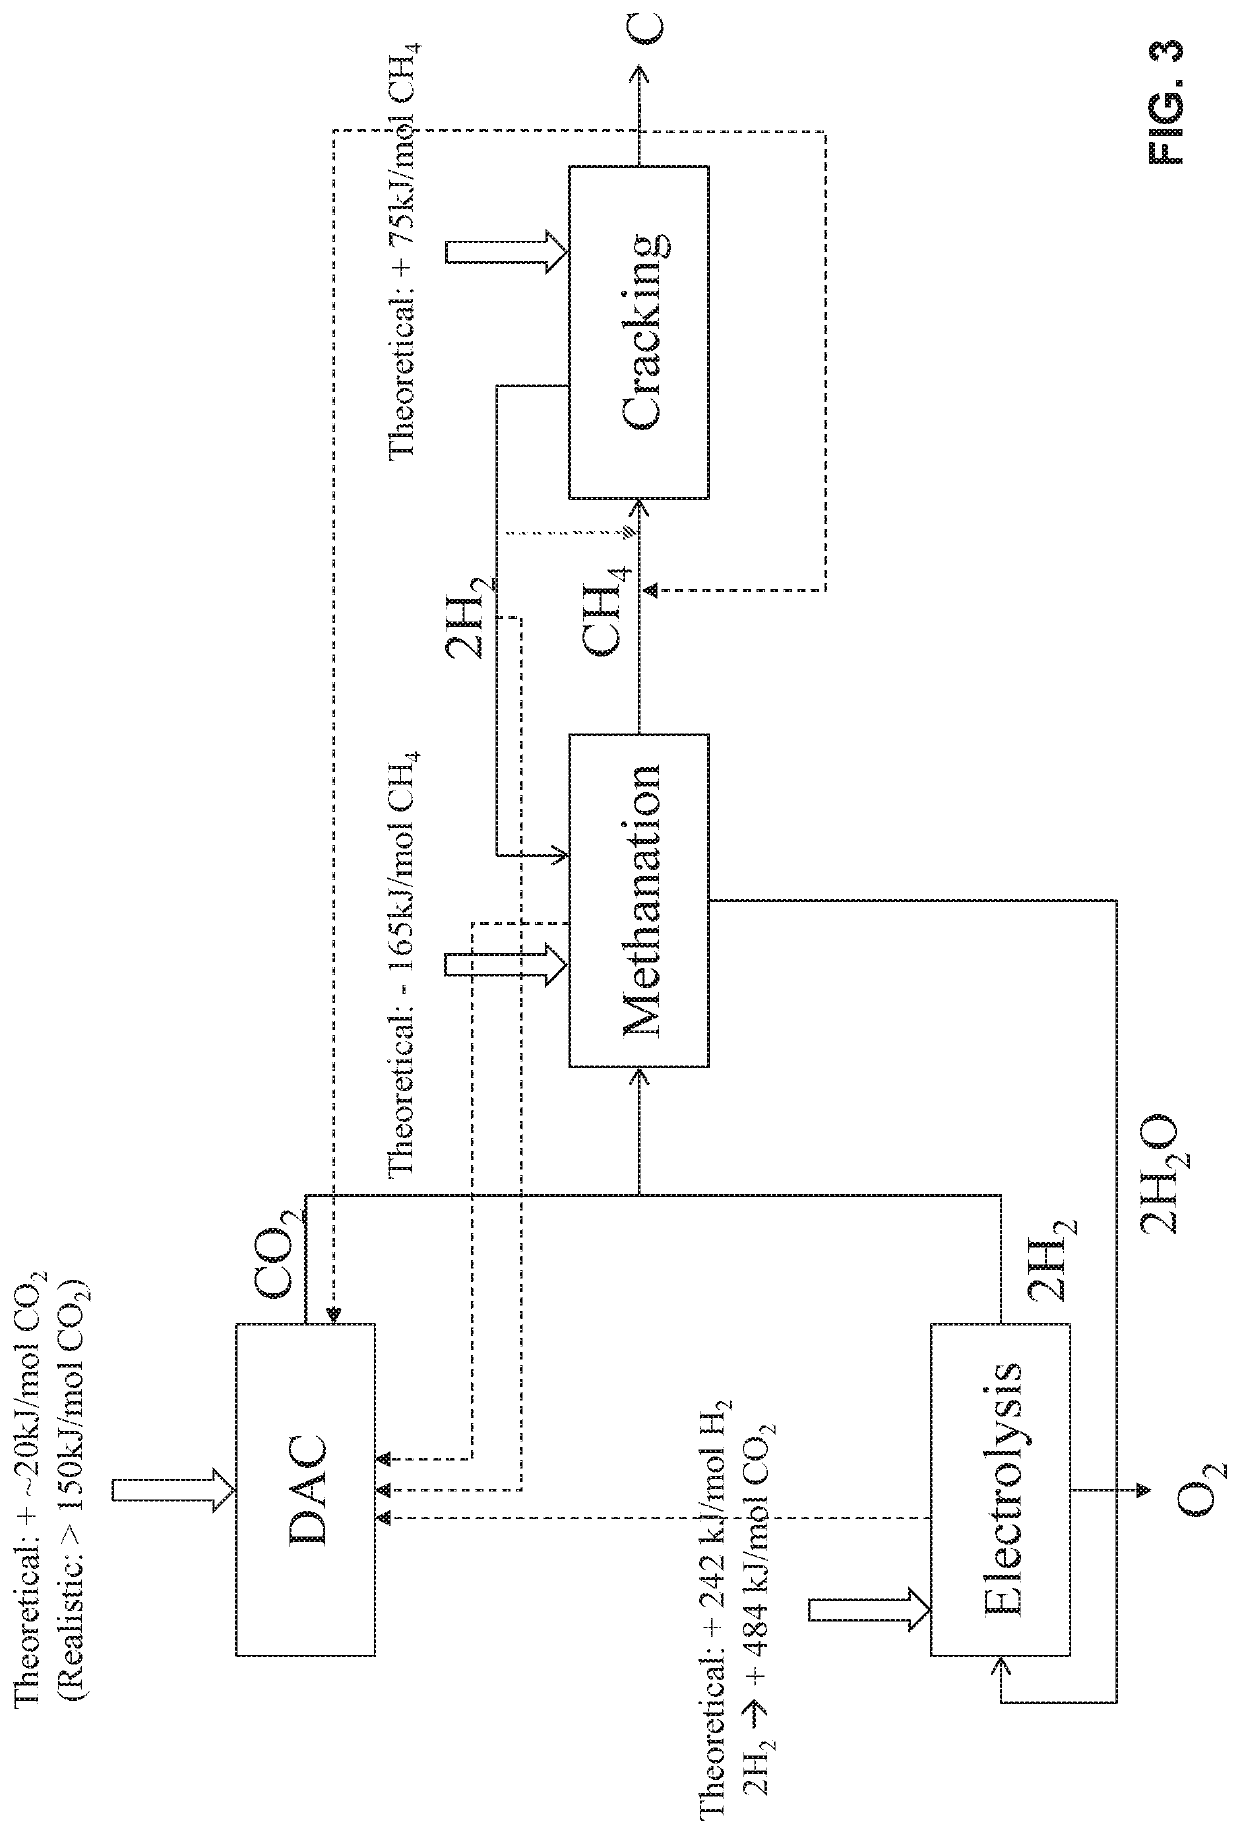 Methods for the removal of co2 from atmospheric air or other co2-containing gas in order to achieve co2 emissions reductions or negative co2 emissions